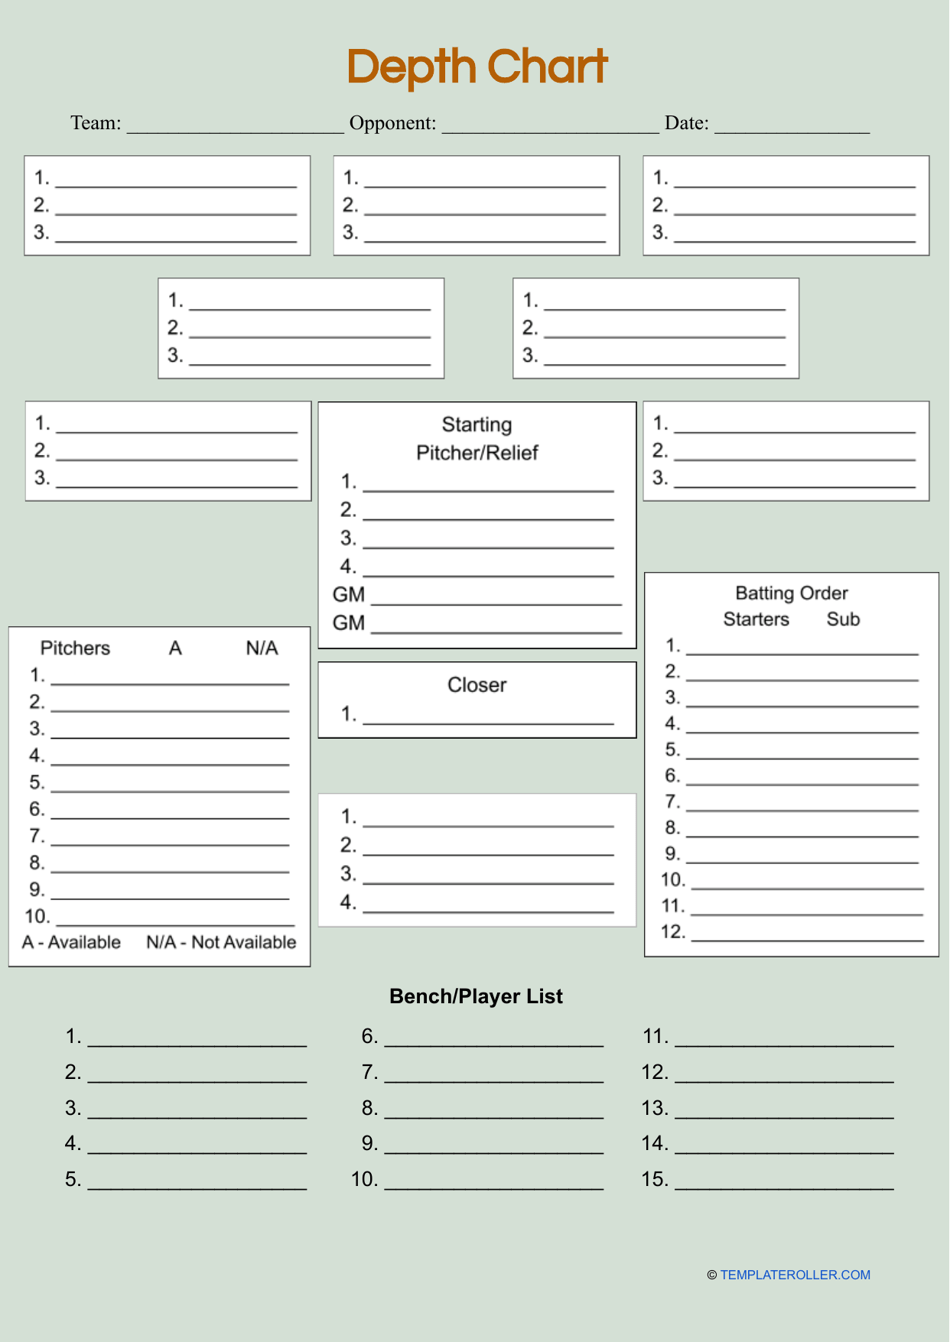 Baseball depth chart template - A chart illustrating the positions and organization of players within a baseball team.